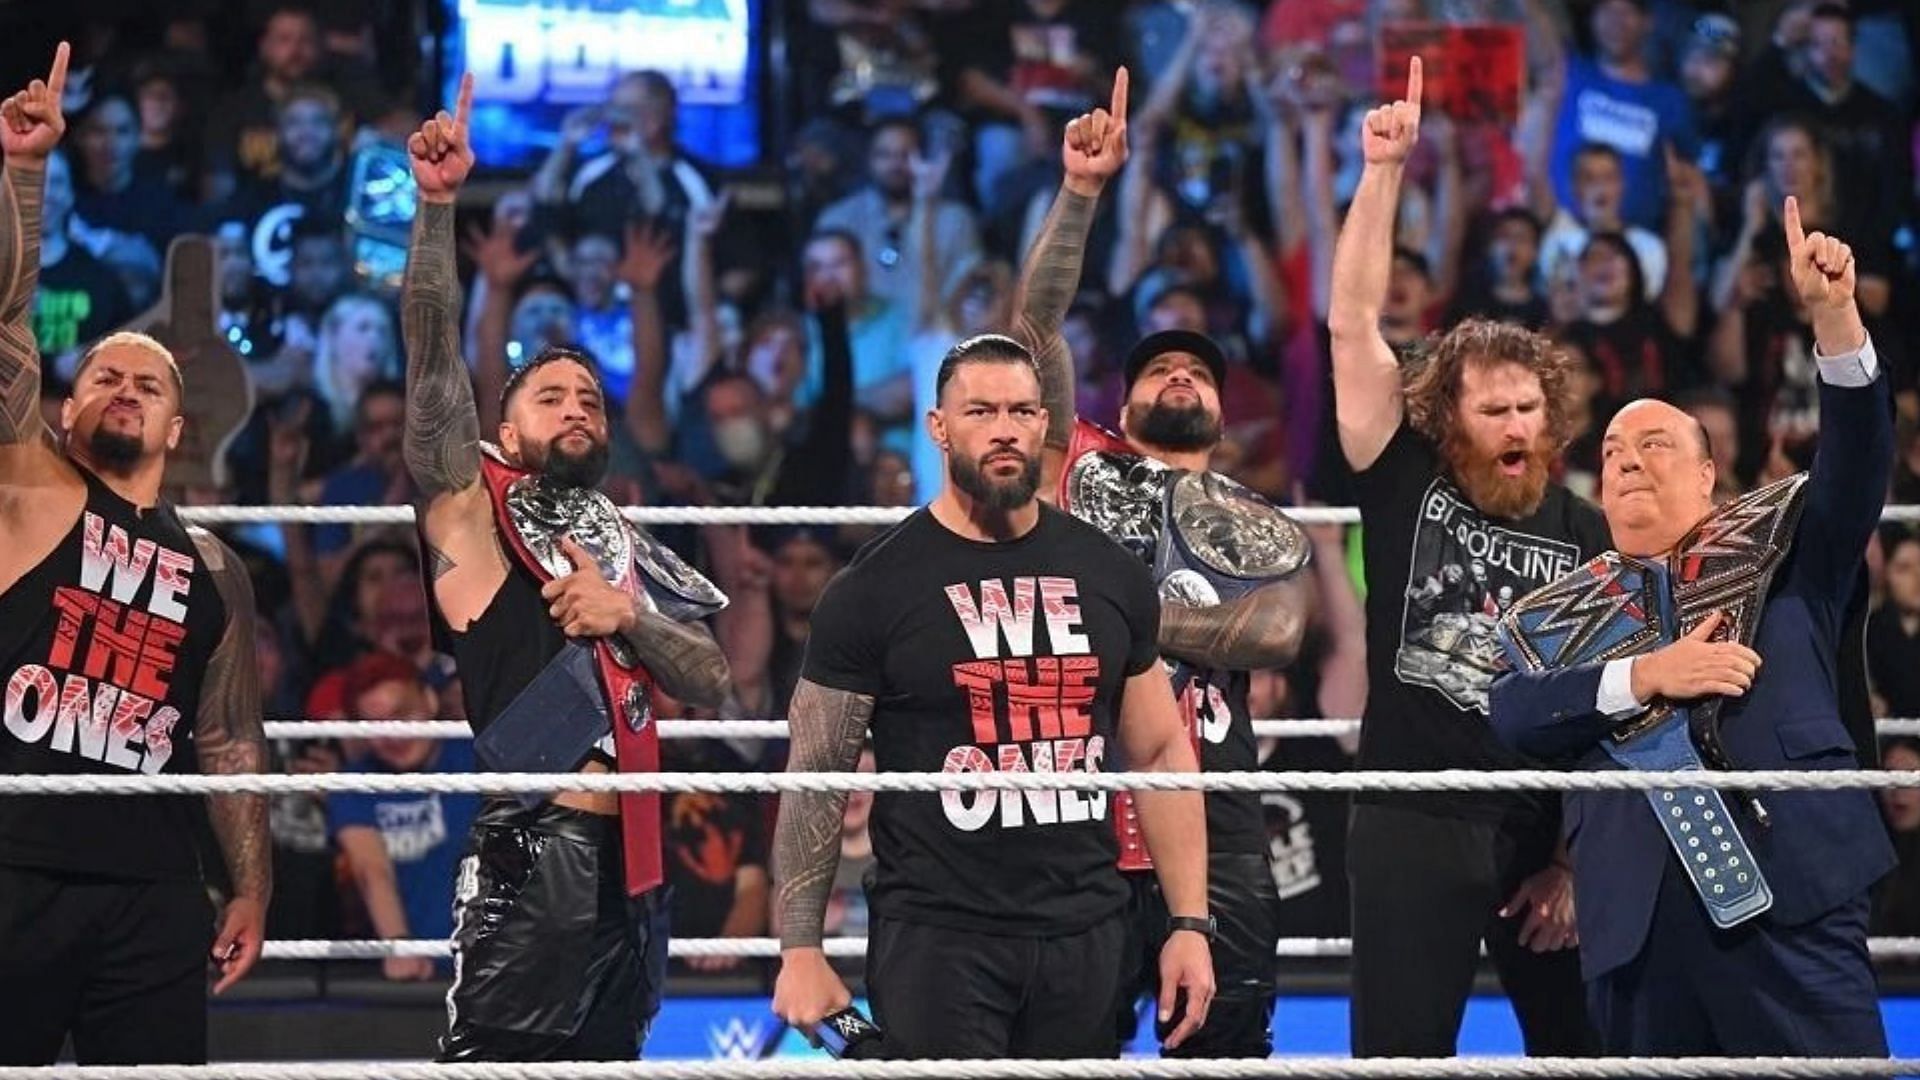 The Bloodline posing in the ring on WWE SmackDown